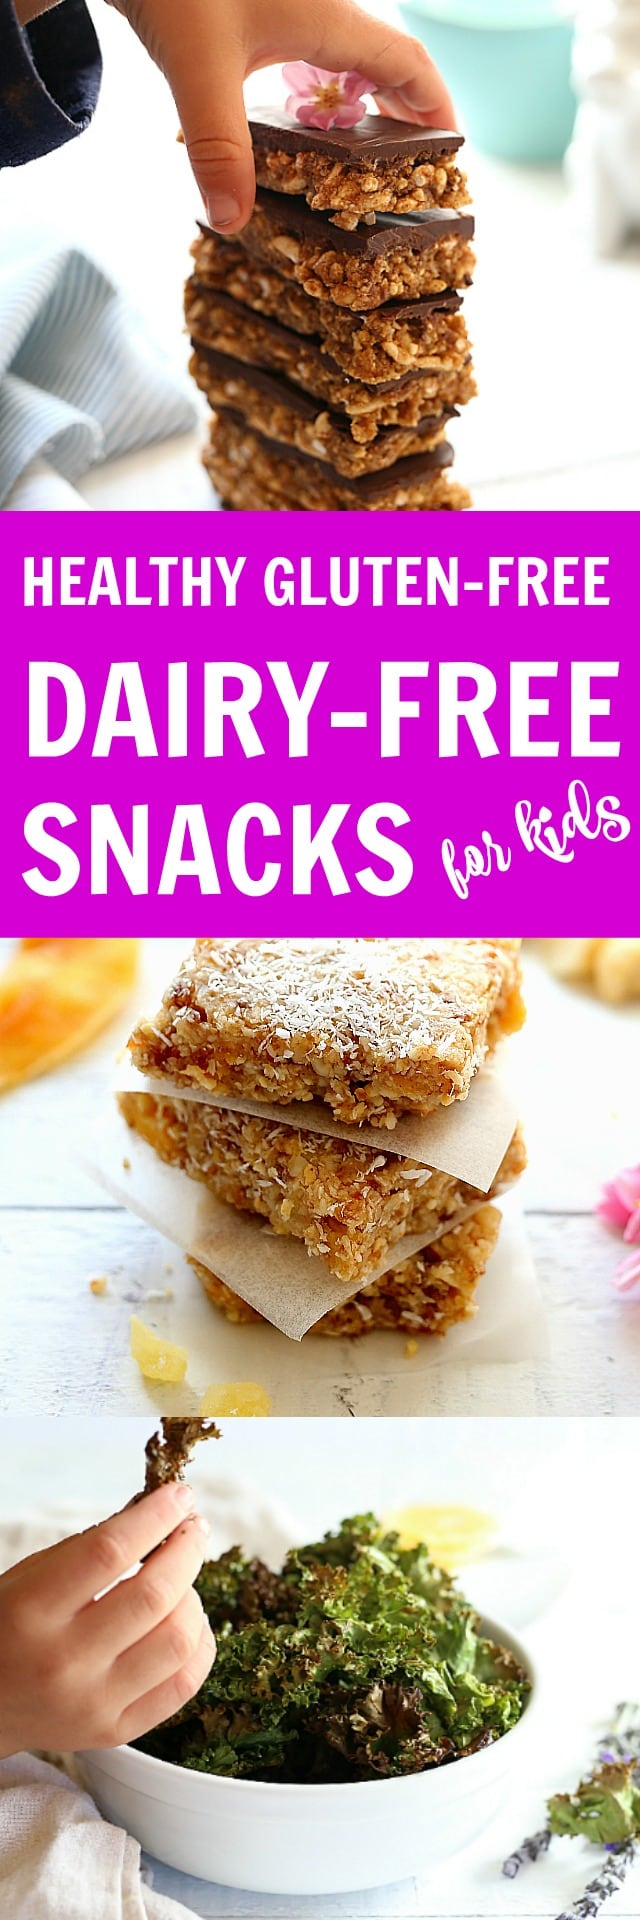 Here's the scoop on what to make! The most delicious healthy, dairy free, and gluten free snacks for kids! Tips and recipes that are easy, non processed and will give children the sustainable energy they need for growing!